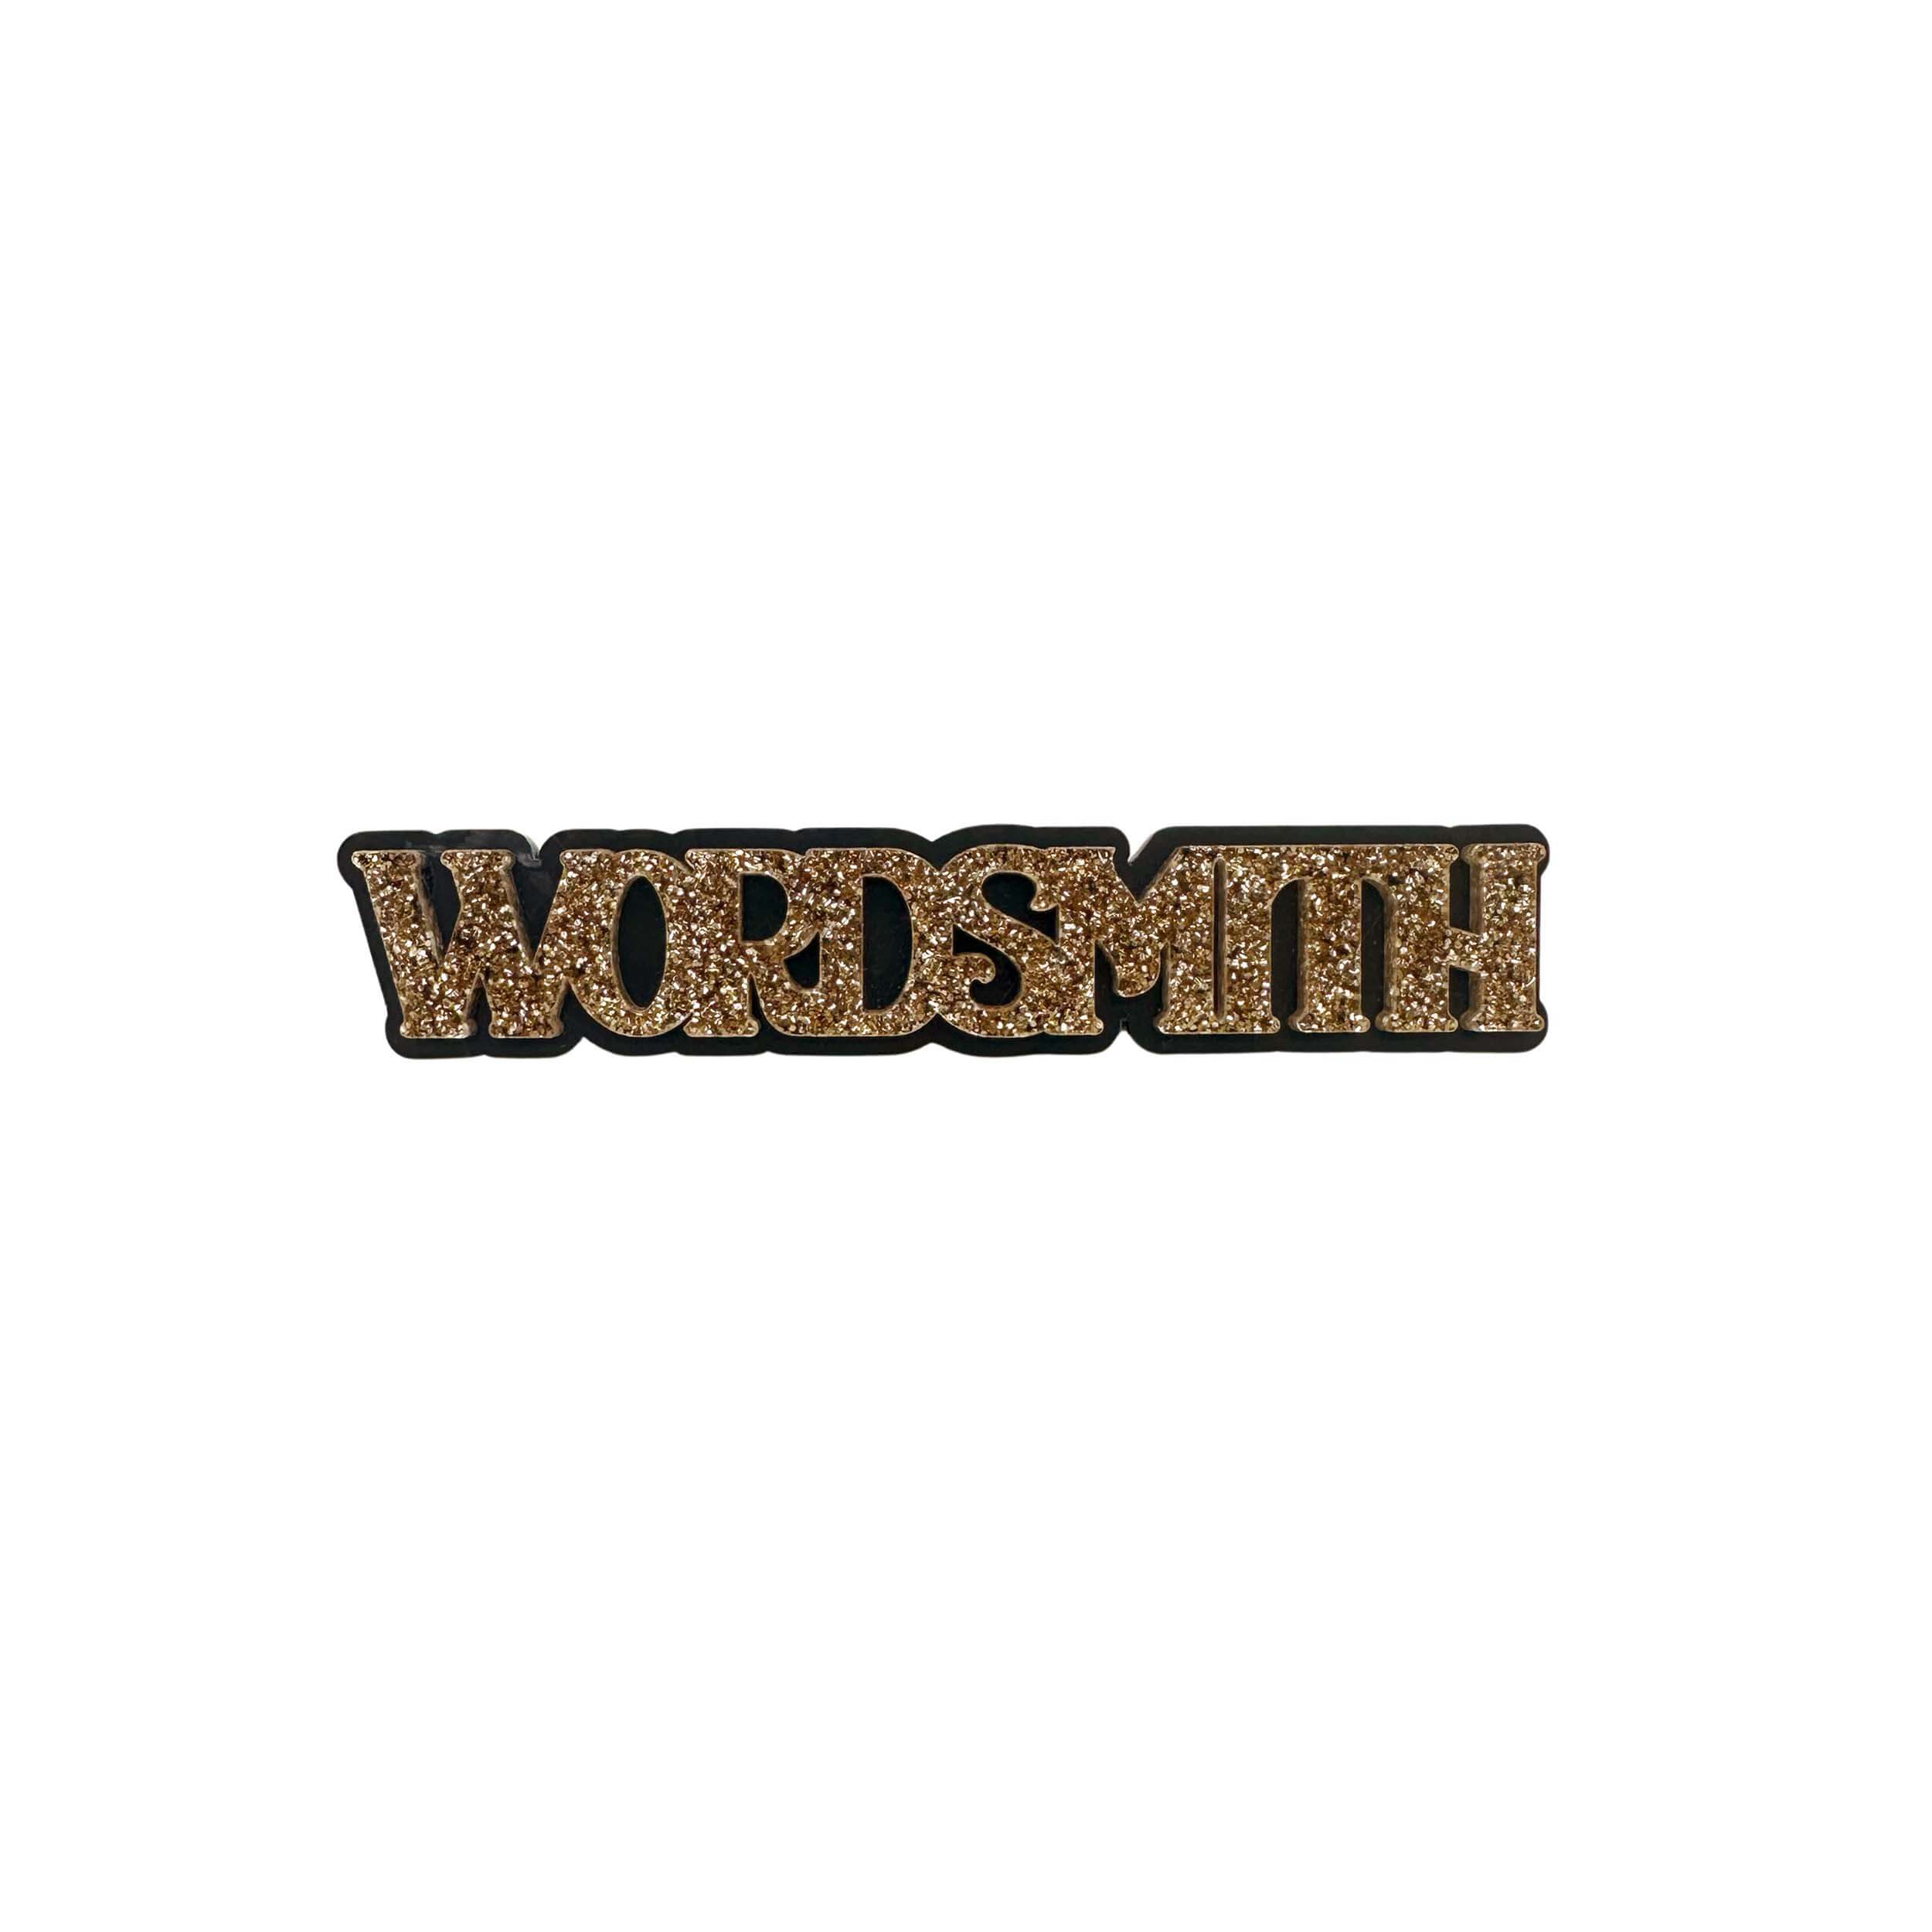 Wordsmith brooch in gold glitter. A great gift for book lovers, writers and all crafters of prose! 